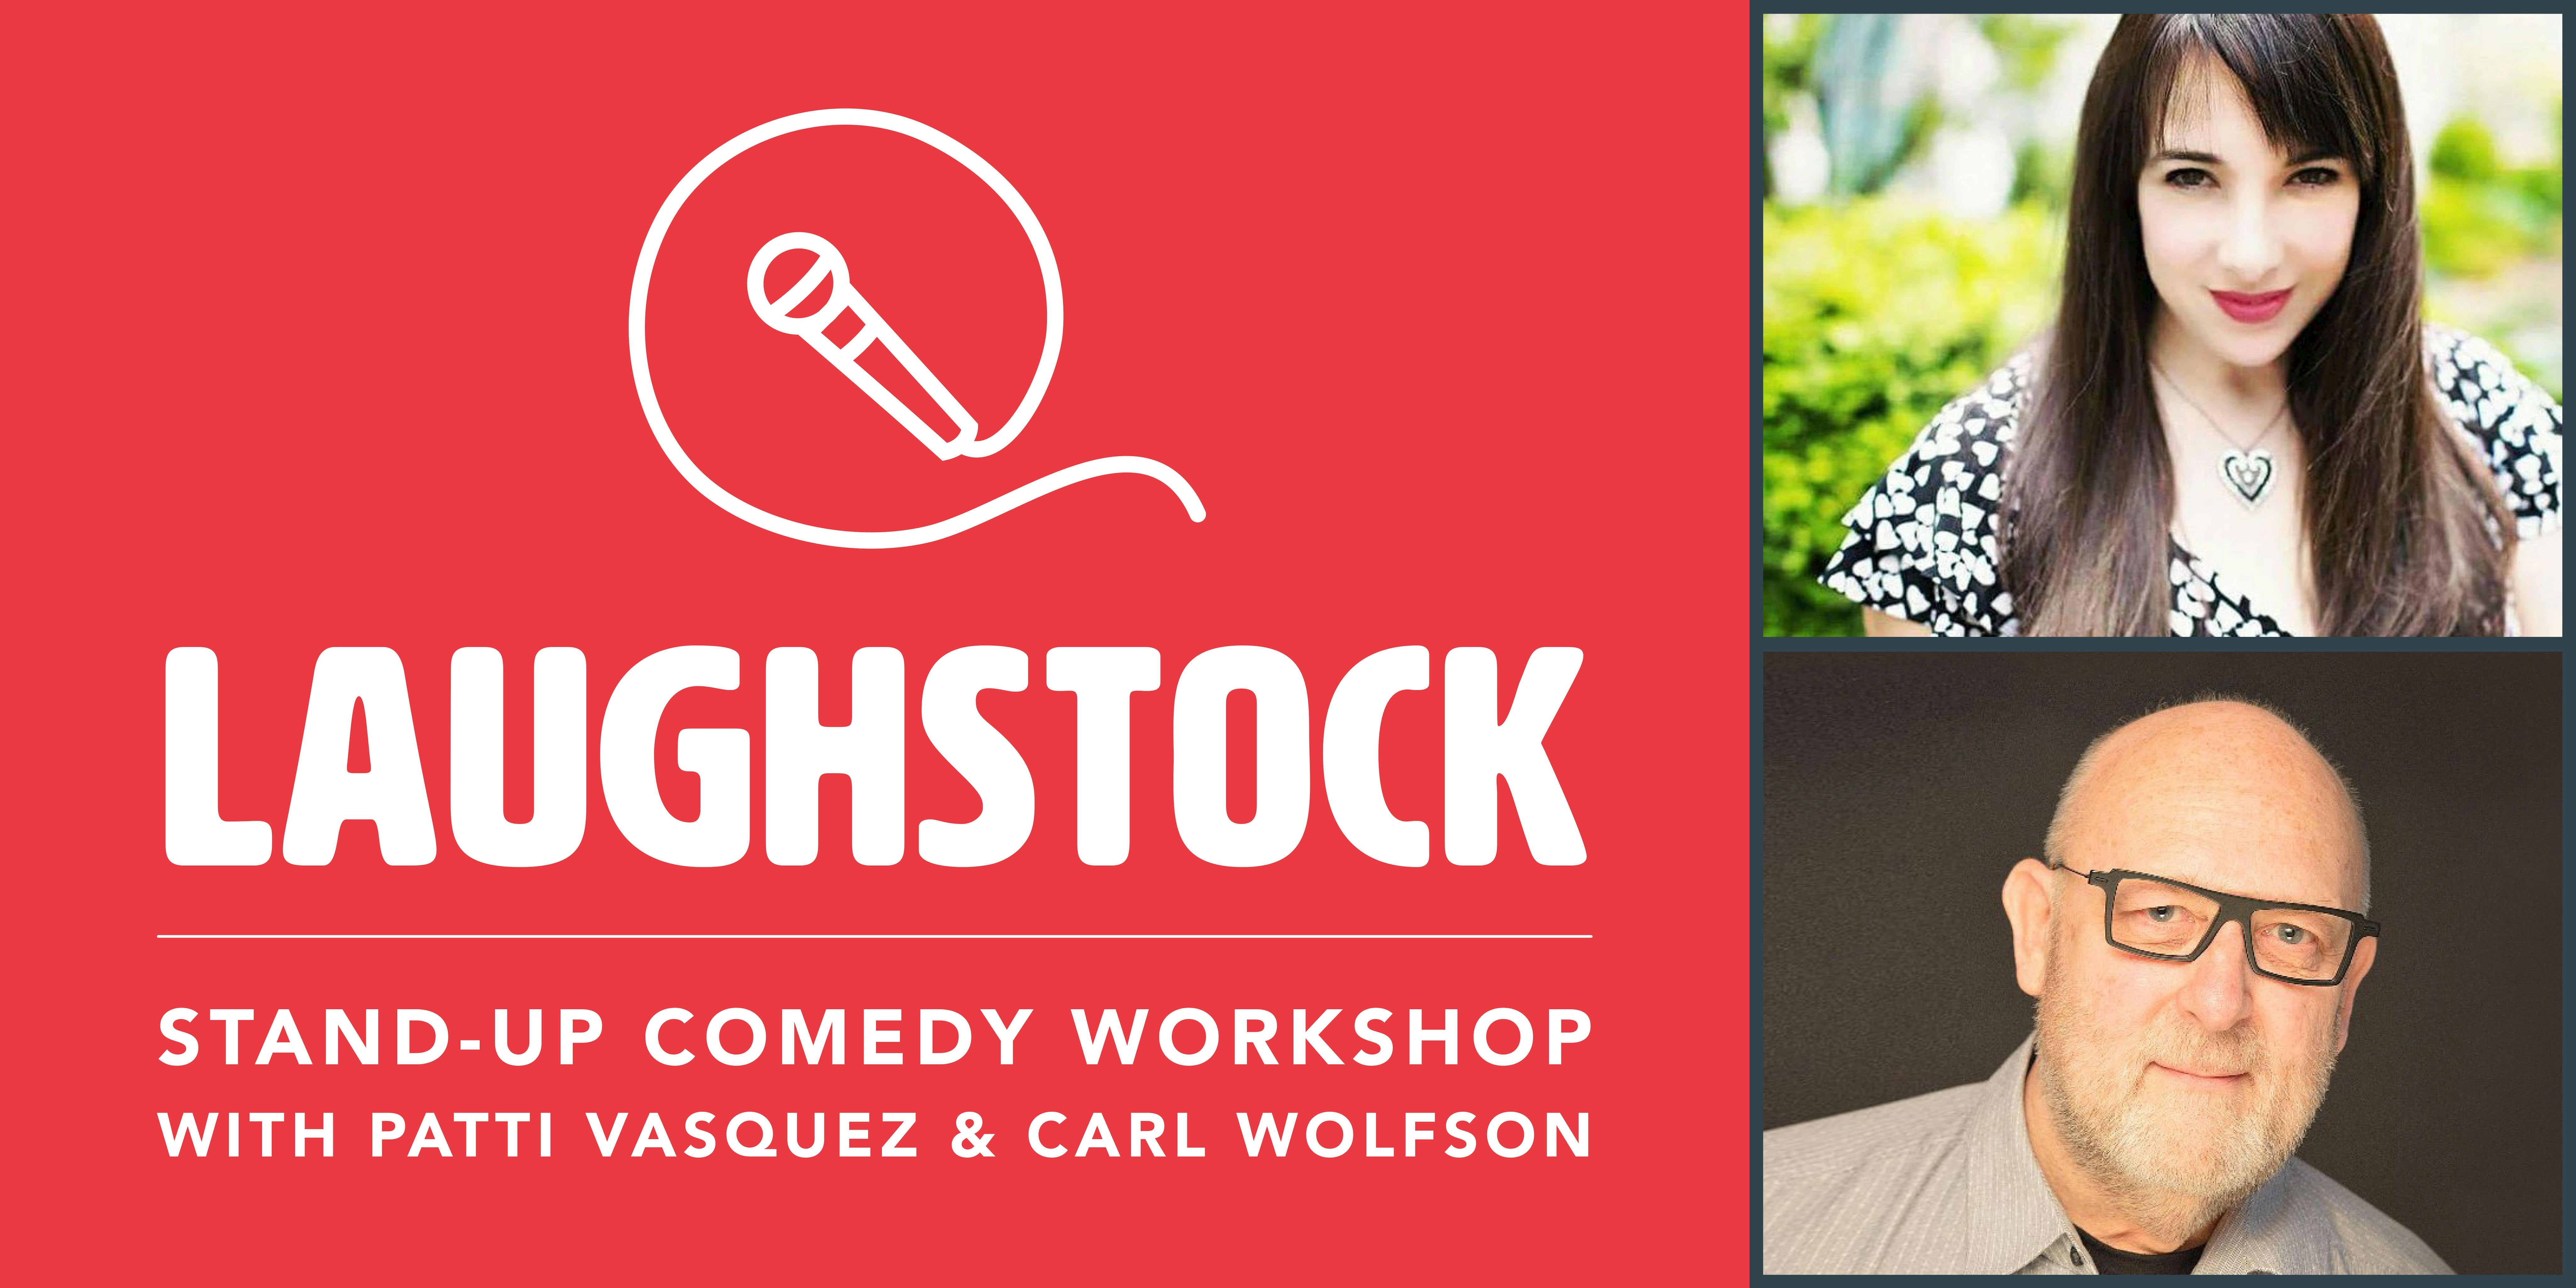 Laughstock Stand-Up Comedy Workshop